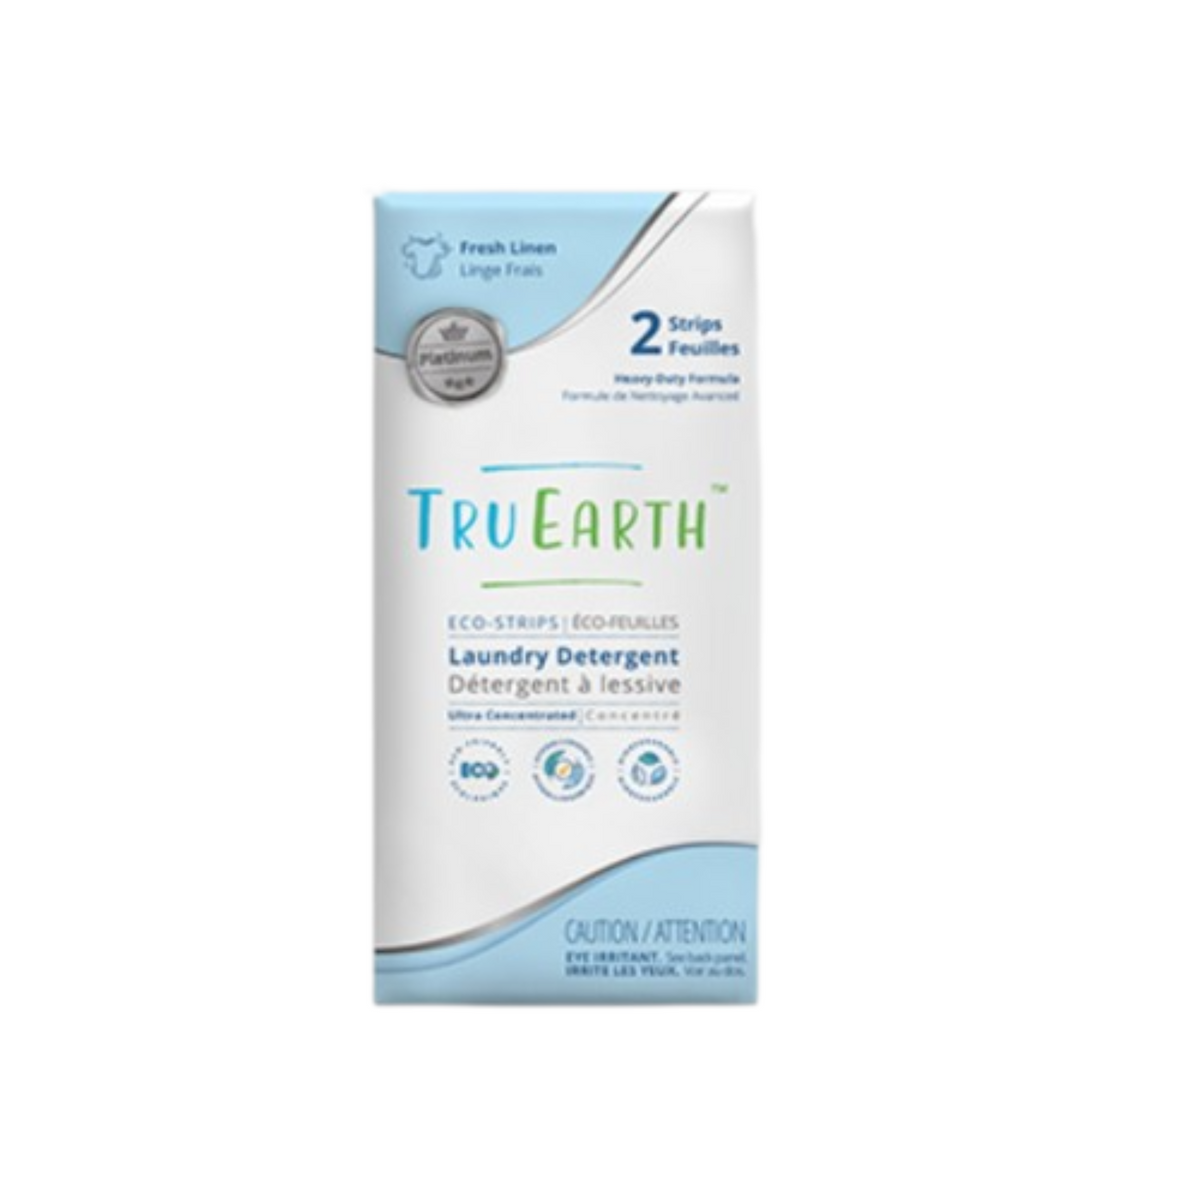 Primary Image of Eco-strips Fresh Linen Laundry Detergent